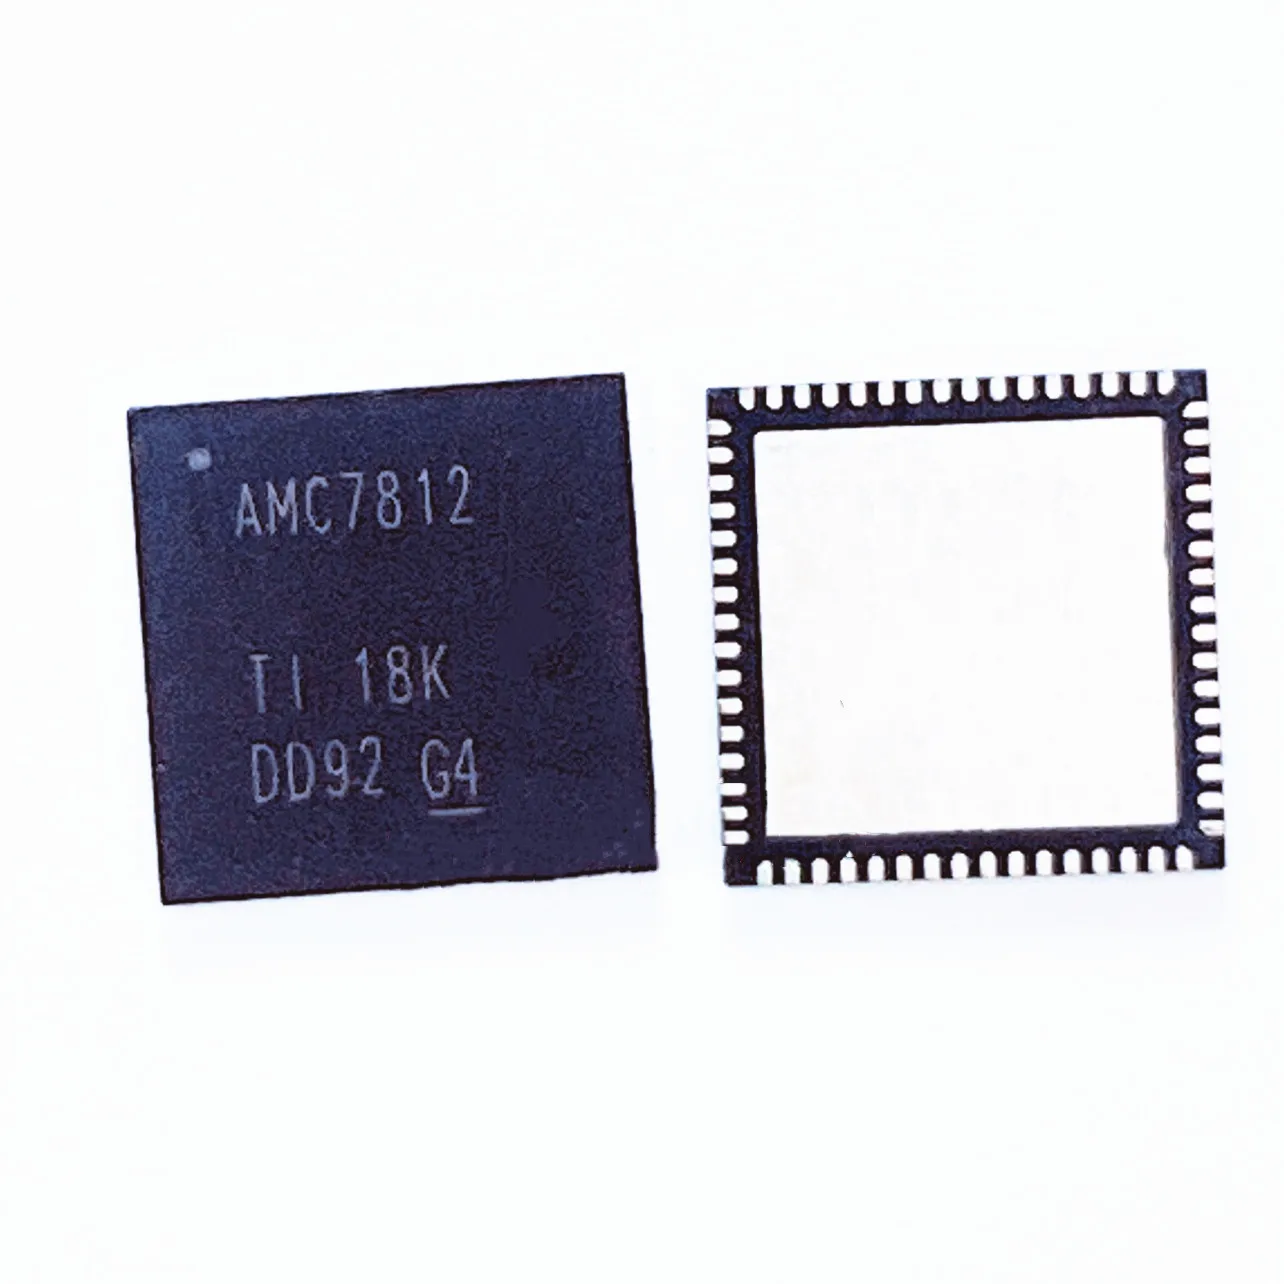 5pcs-lot-amc7812srgcr-vqfn-64-marking-amc7812-data-acquisition-adcs-dacs-specialized-integratedmultich-adc-and-dac